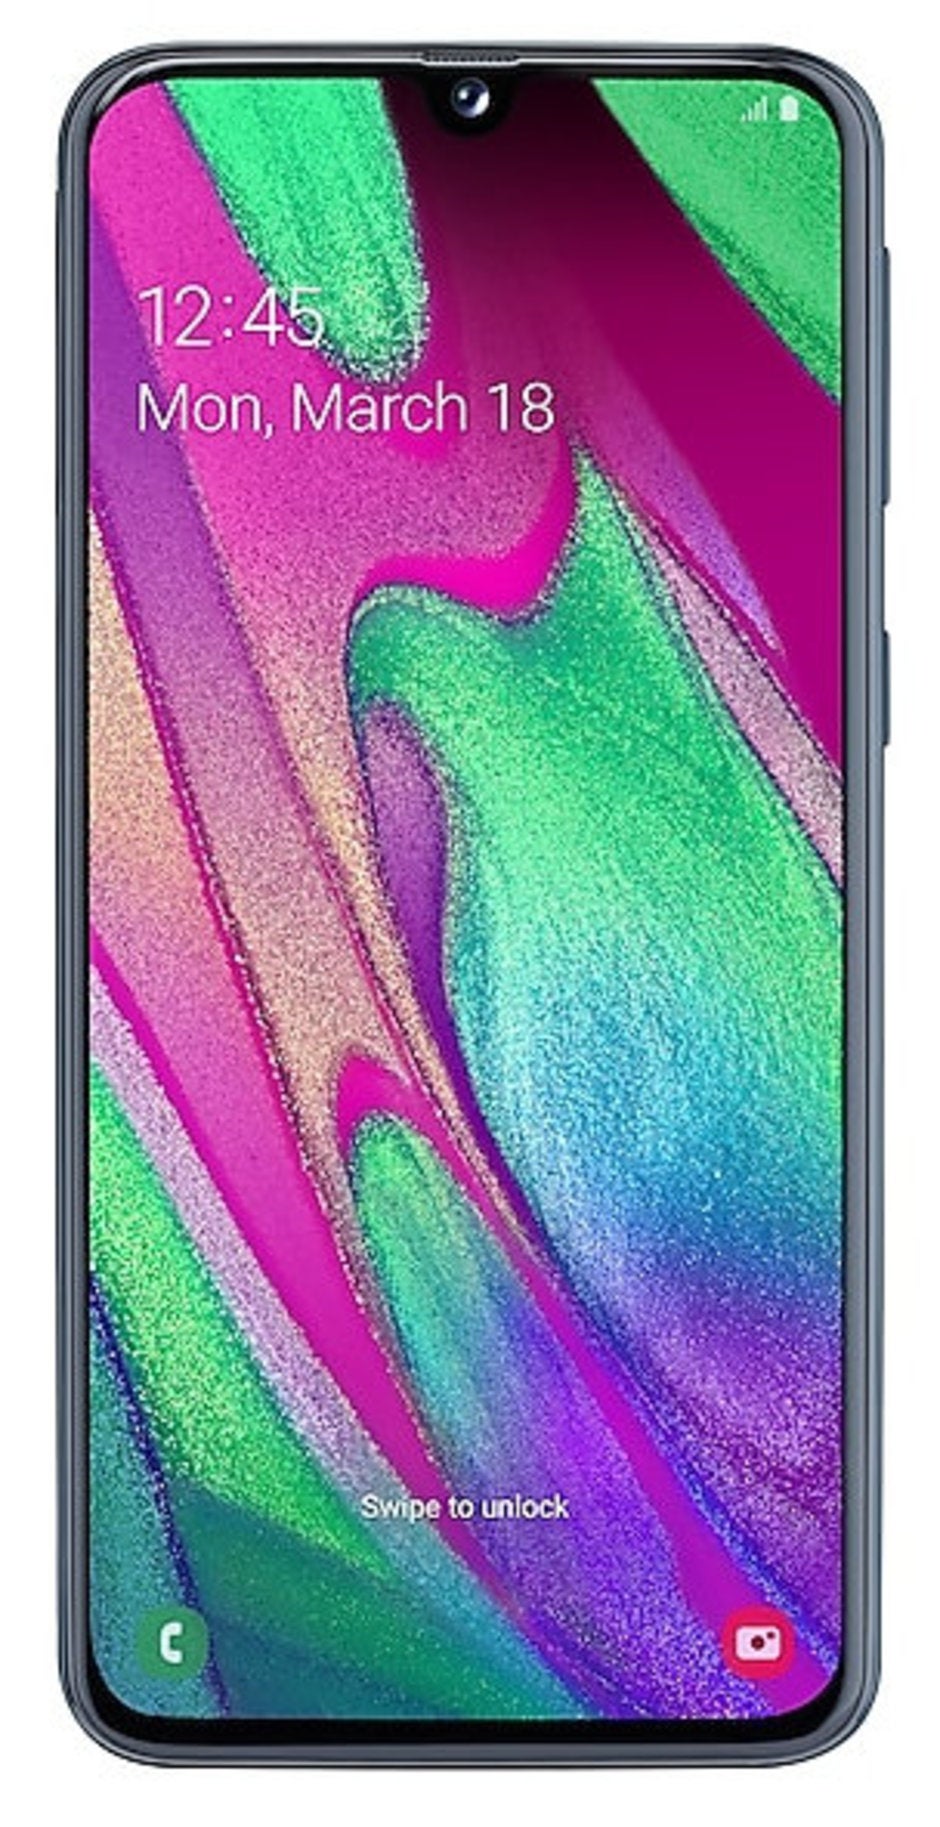 Samsung Galaxy A40 - Samsung Galaxy A20e and A40 go official with solid specs, low prices